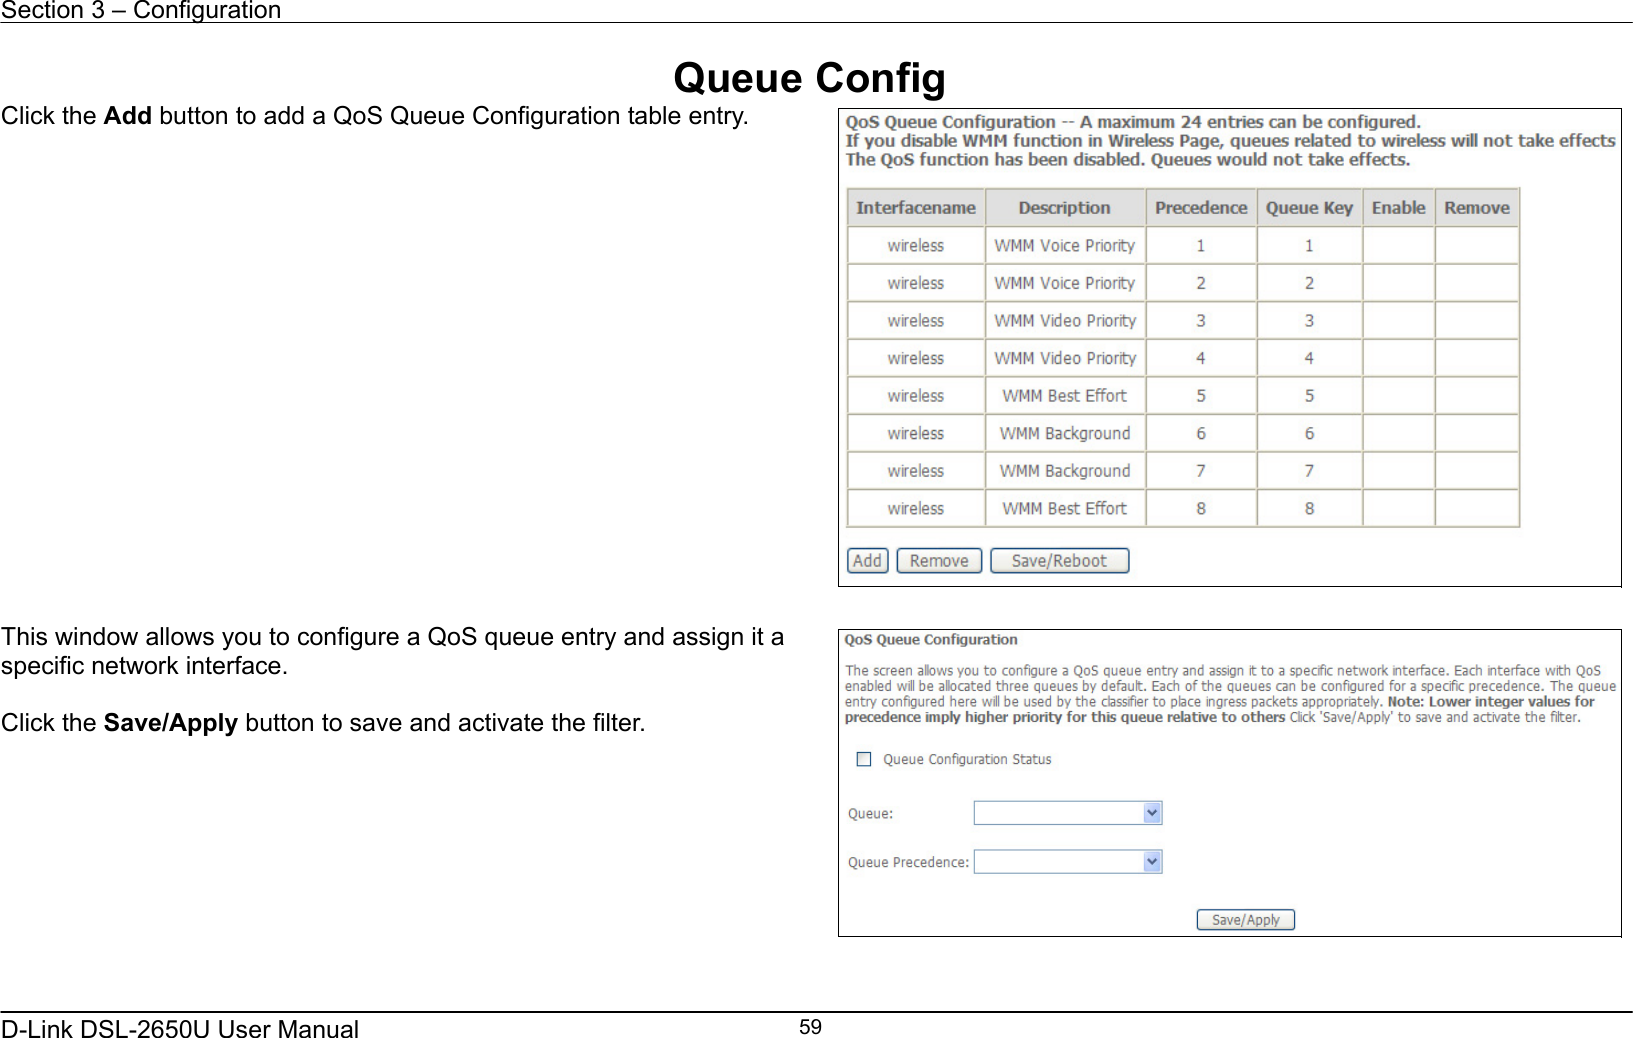 Section 3 – Configuration   D-Link DSL-2650U User Manual    59Queue Config Click the Add button to add a QoS Queue Configuration table entry.     This window allows you to configure a QoS queue entry and assign it a specific network interface.   Click the Save/Apply button to save and activate the filter.    